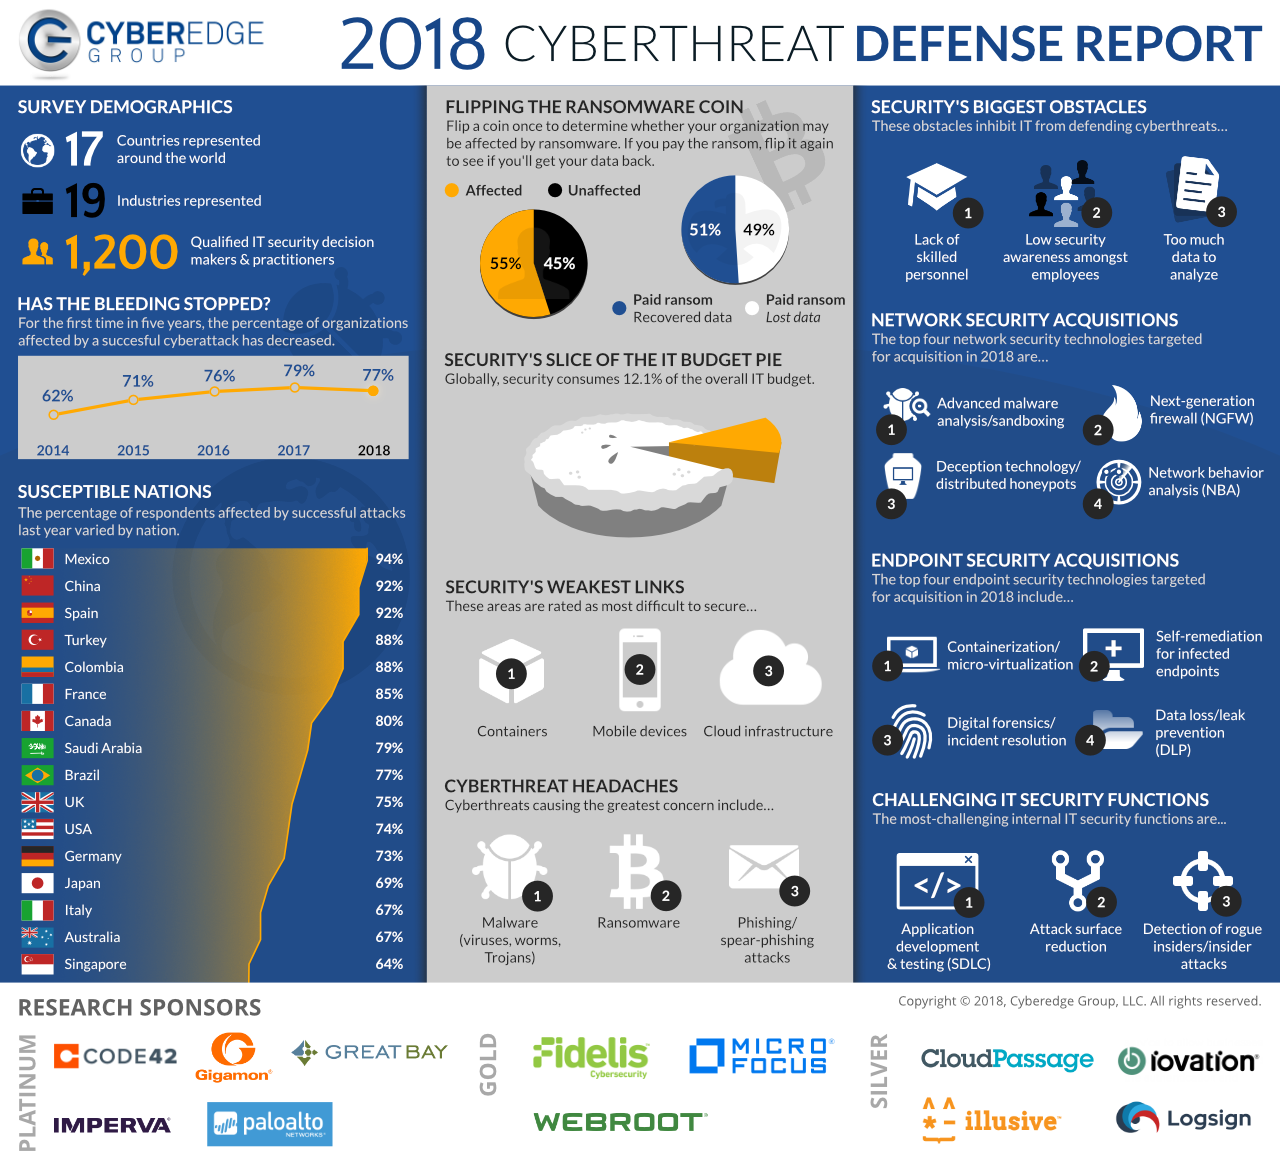 Presentation image for CyberEdge 2018 Cyberthreat Defense Report Infographic